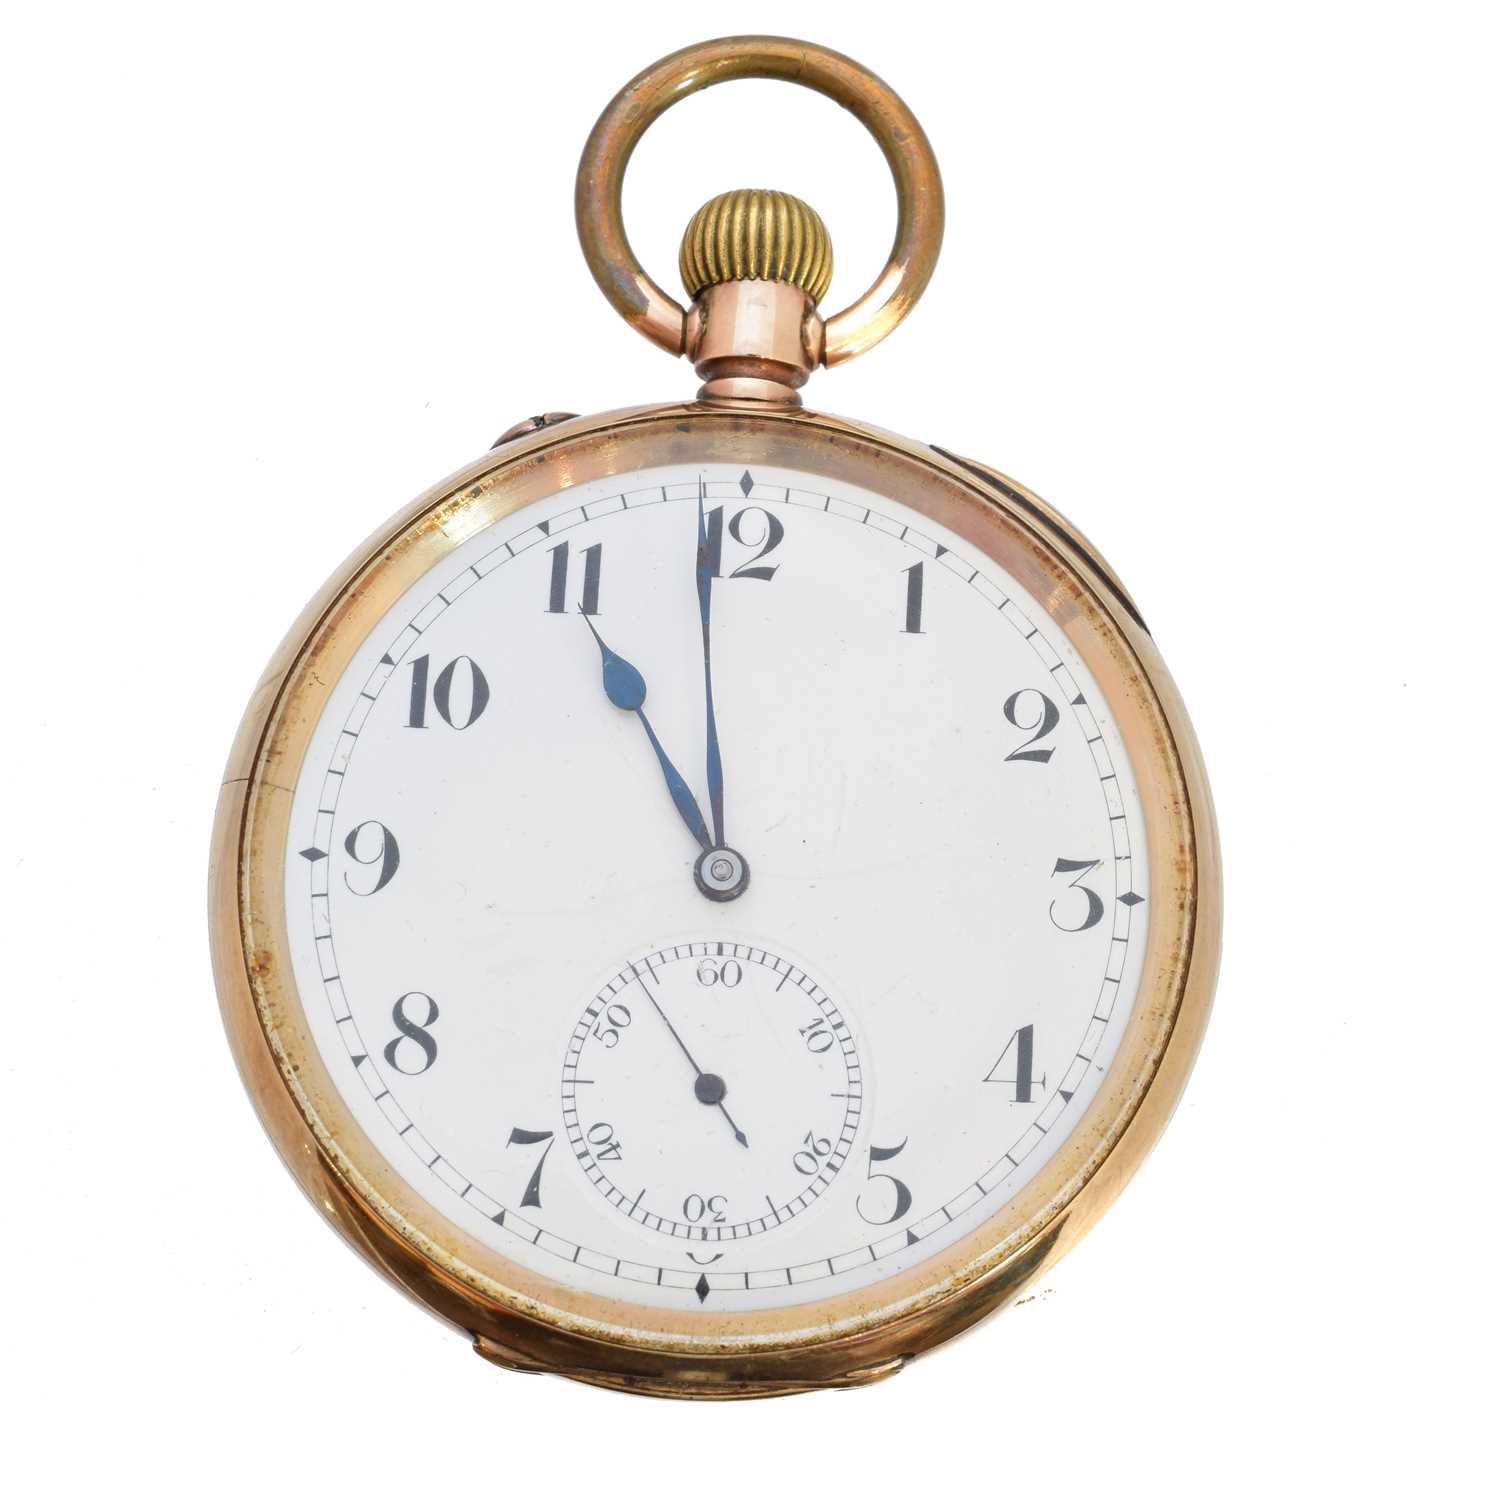 Lot 293 - A 9ct gold open face pocket watch by Stauffer & Co.